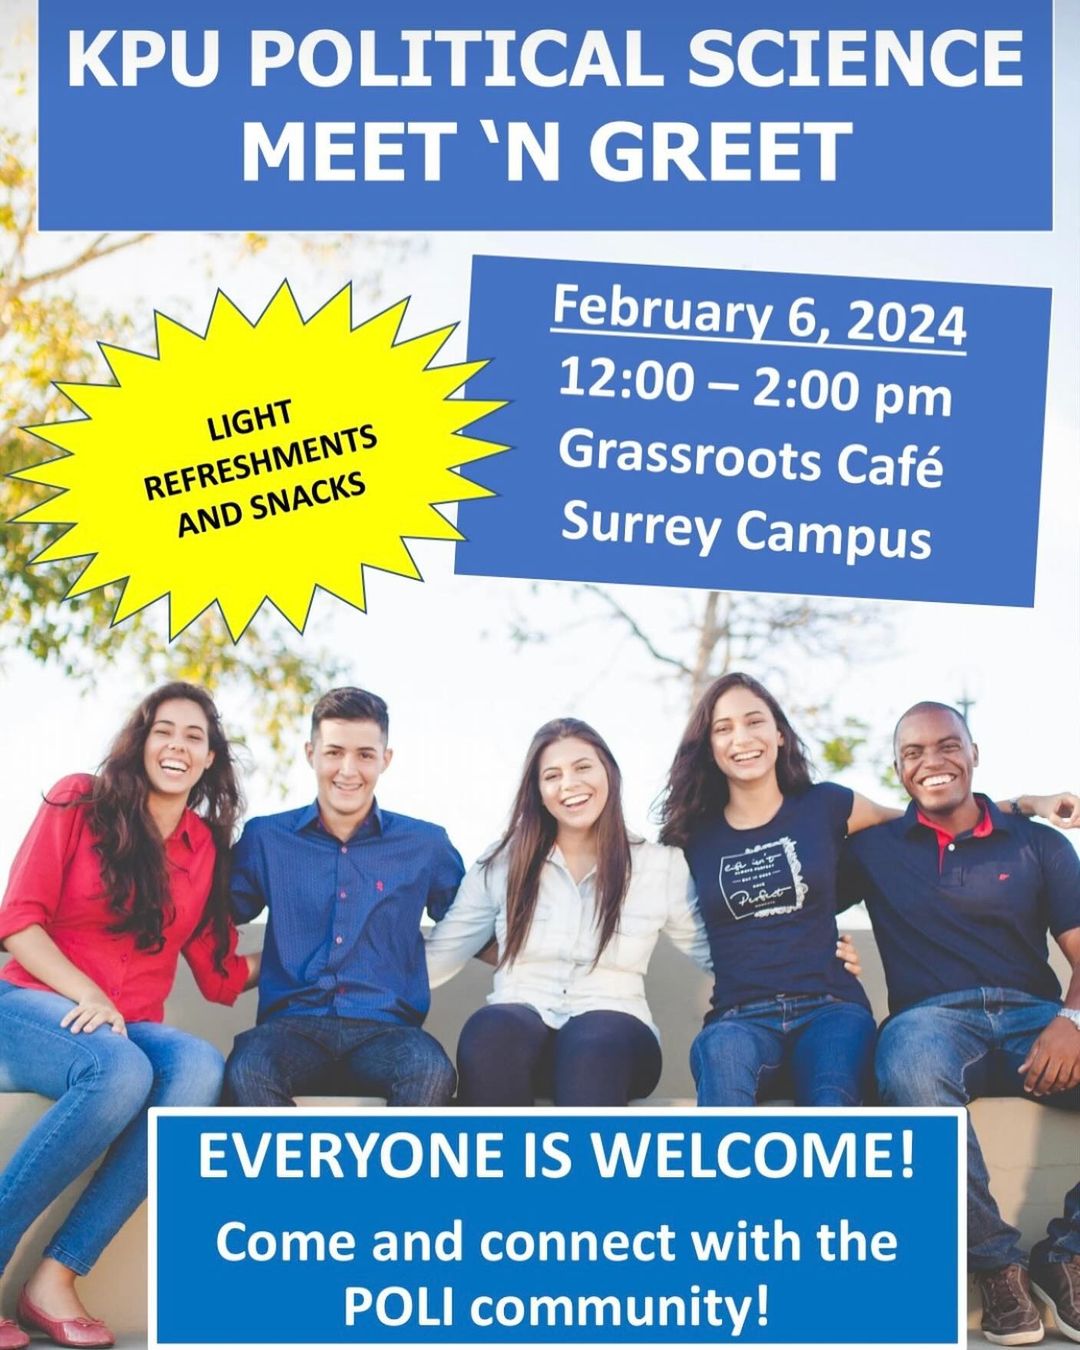 KPU Political Science: Meet N' Greet. Feb. 6, 2024, 12:00 PM – 2:00 PM. Grassroots Café, Surrey Campus. Come and connect with the POLI community! Light refreshments and snacks.